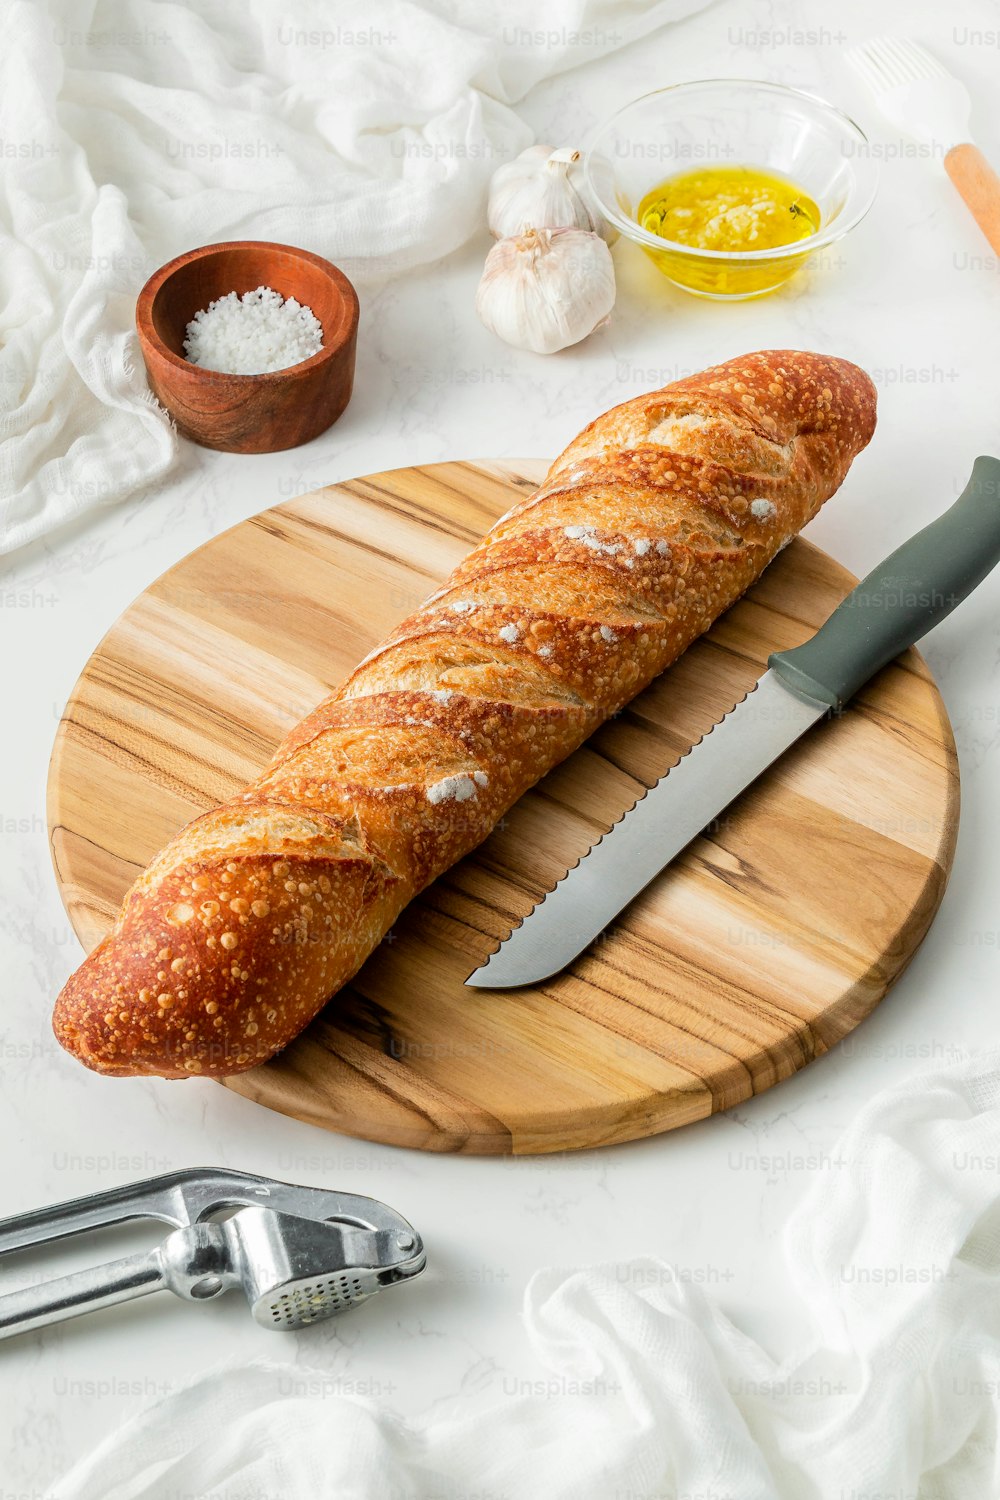 a loaf of bread on a cutting board with a knife